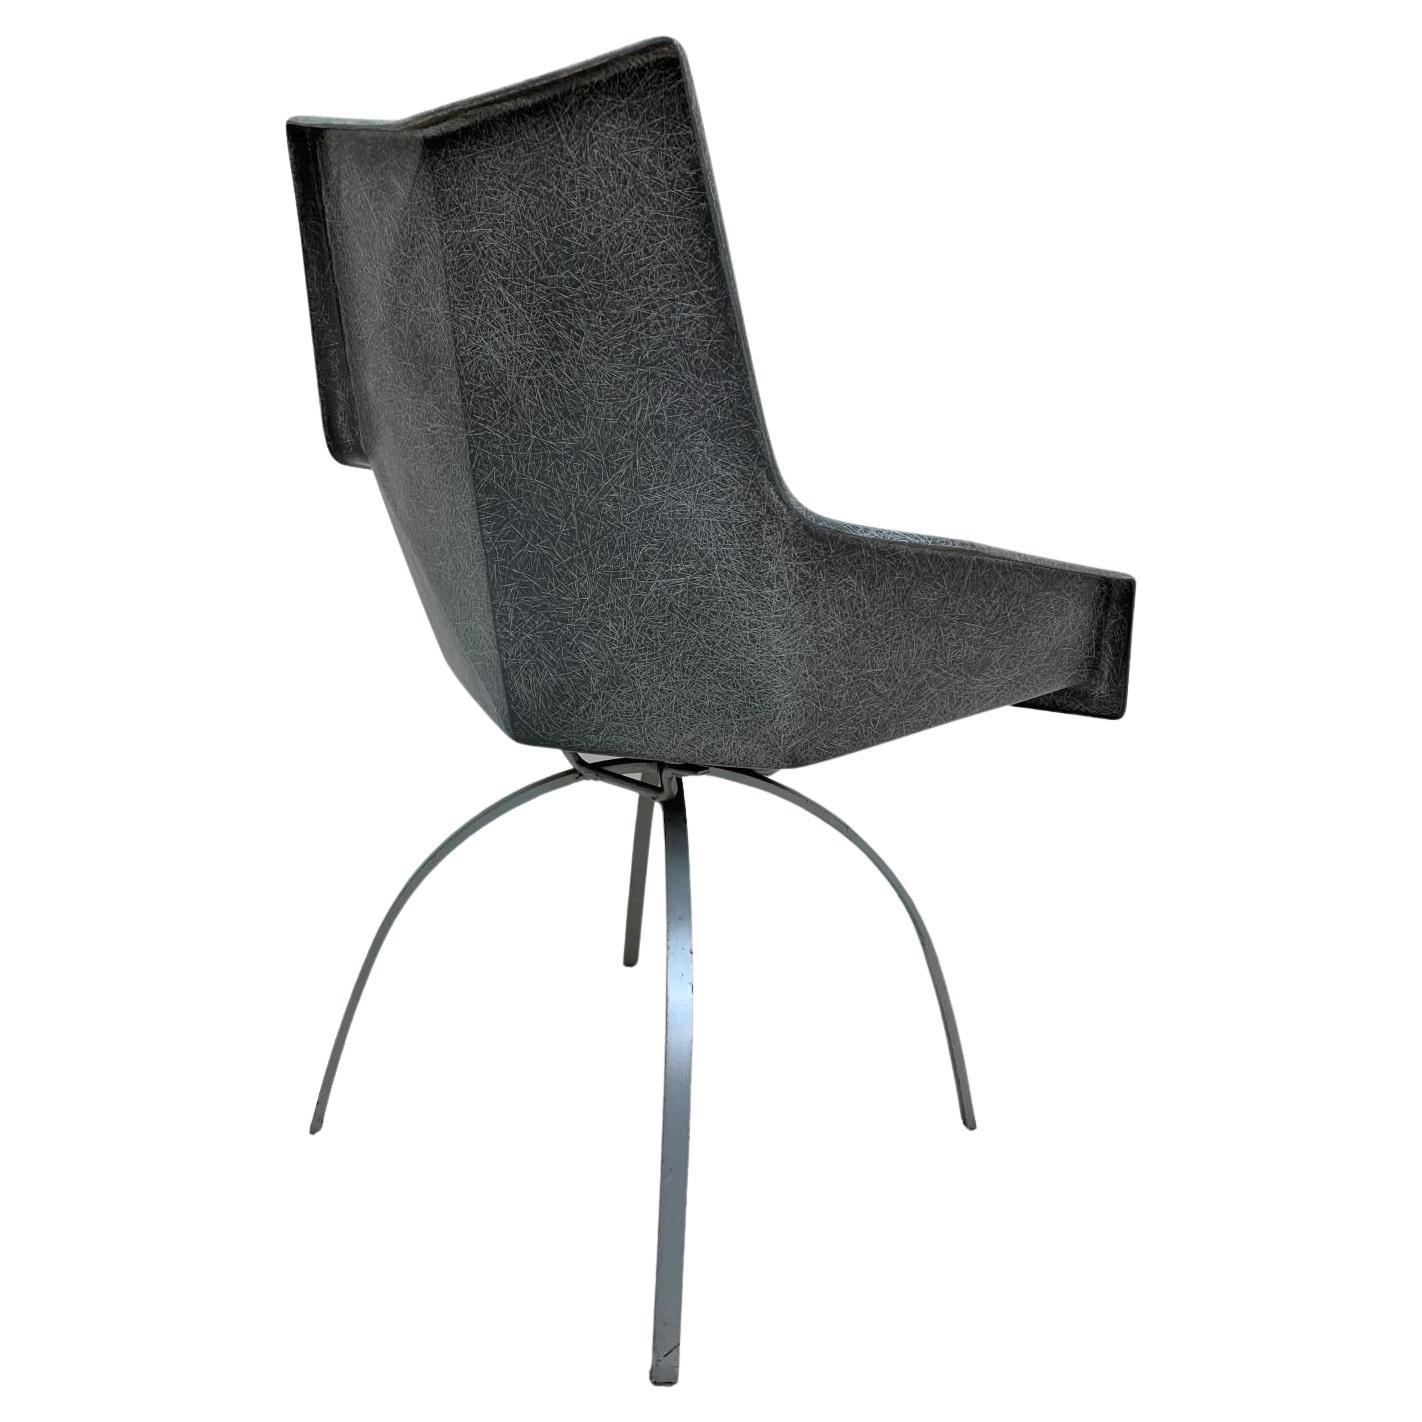 Mid-Century Modern Iconic and Rare Origami Fiberglass Chair with Spider Leg Base by Paul McCobb